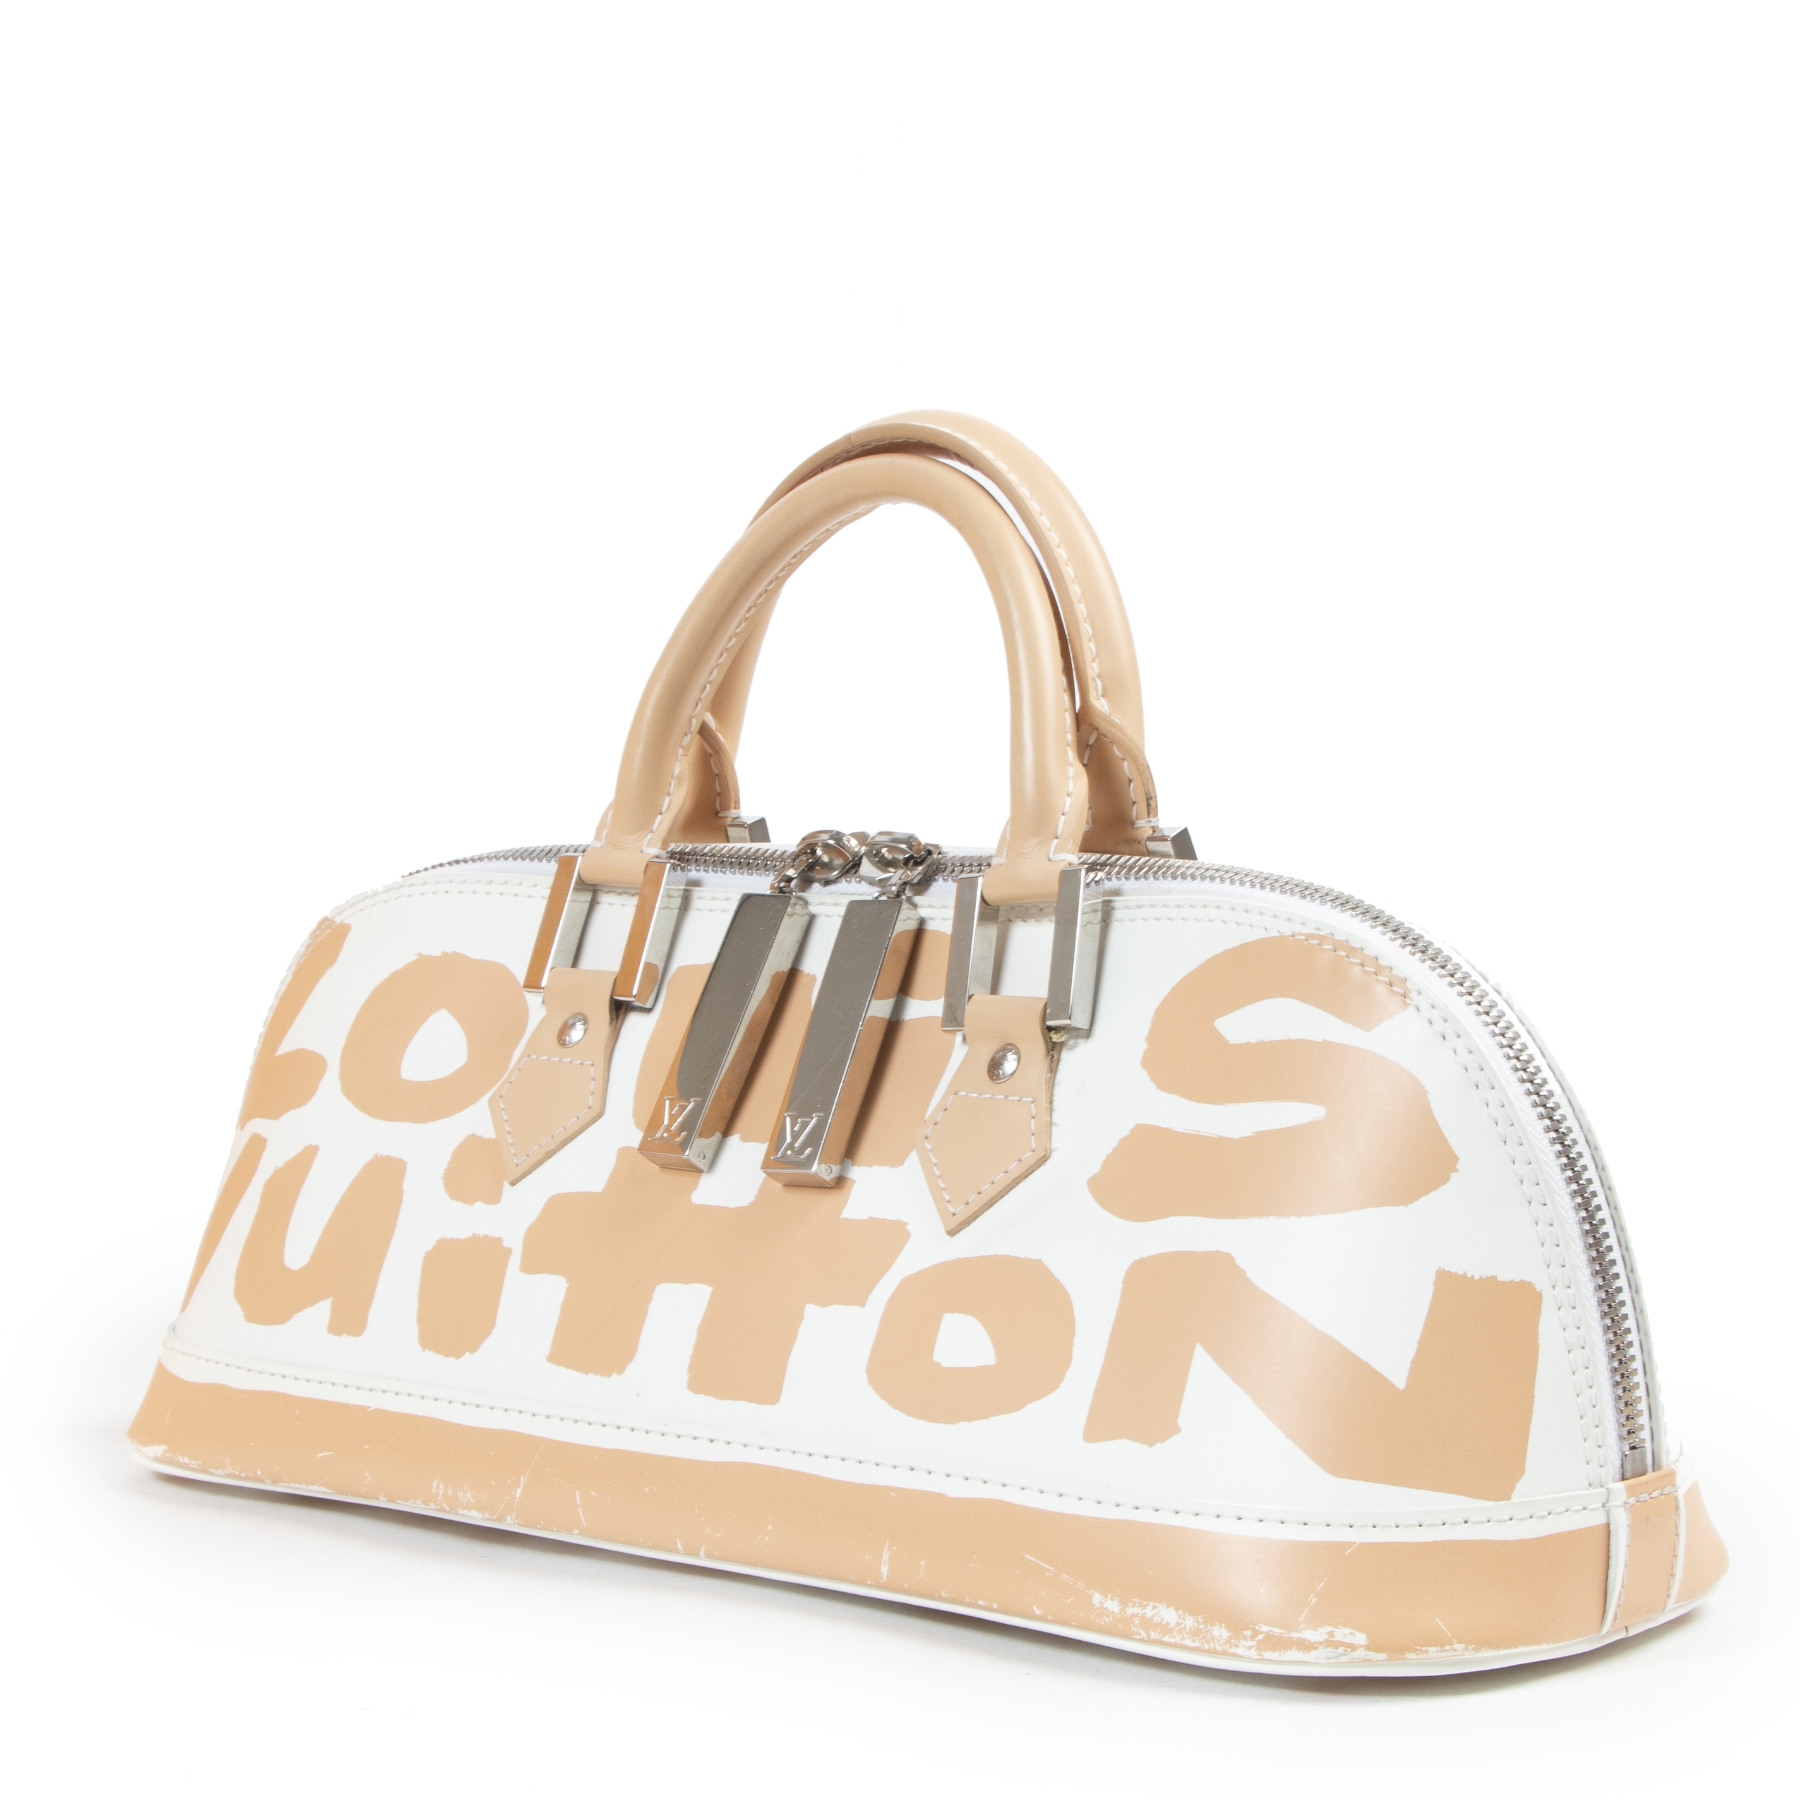 Louis Vuitton. Somerset Mall Cultivate closeness to the arts for  initiates The fact that the bags are in a glass case in…